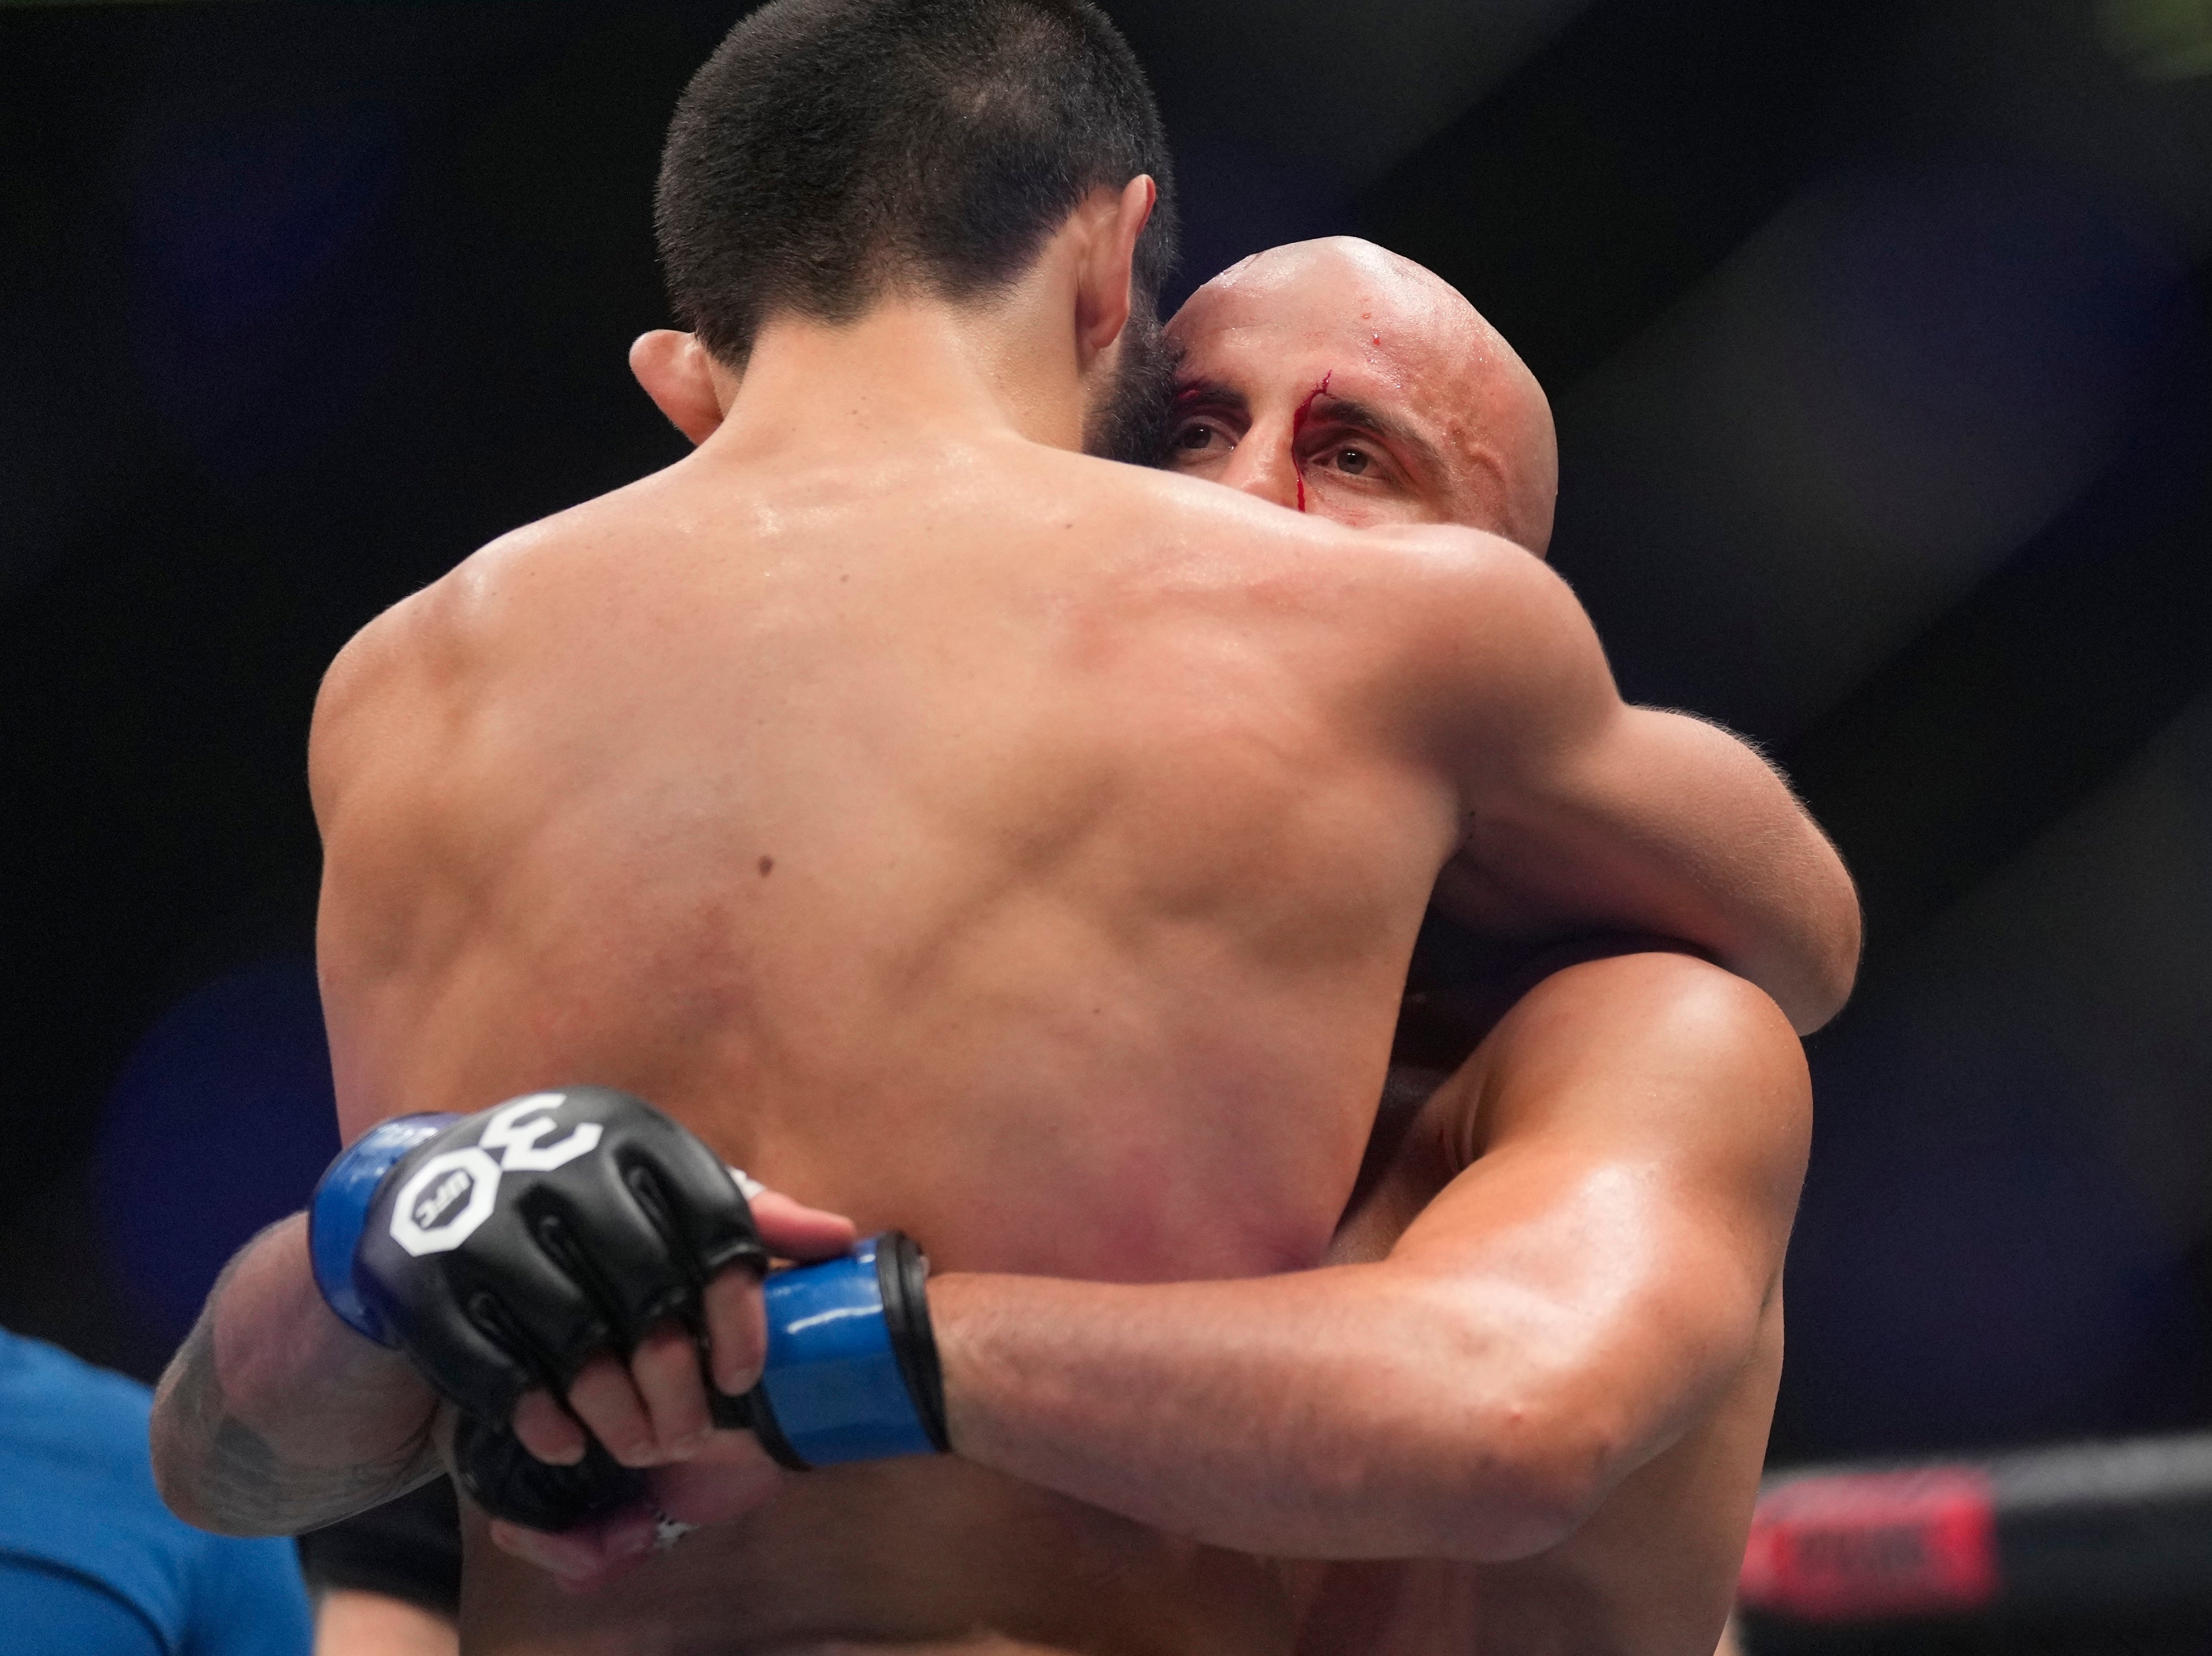 Makhachev consoles Volkanovski after their fight, the main event of UFC 294